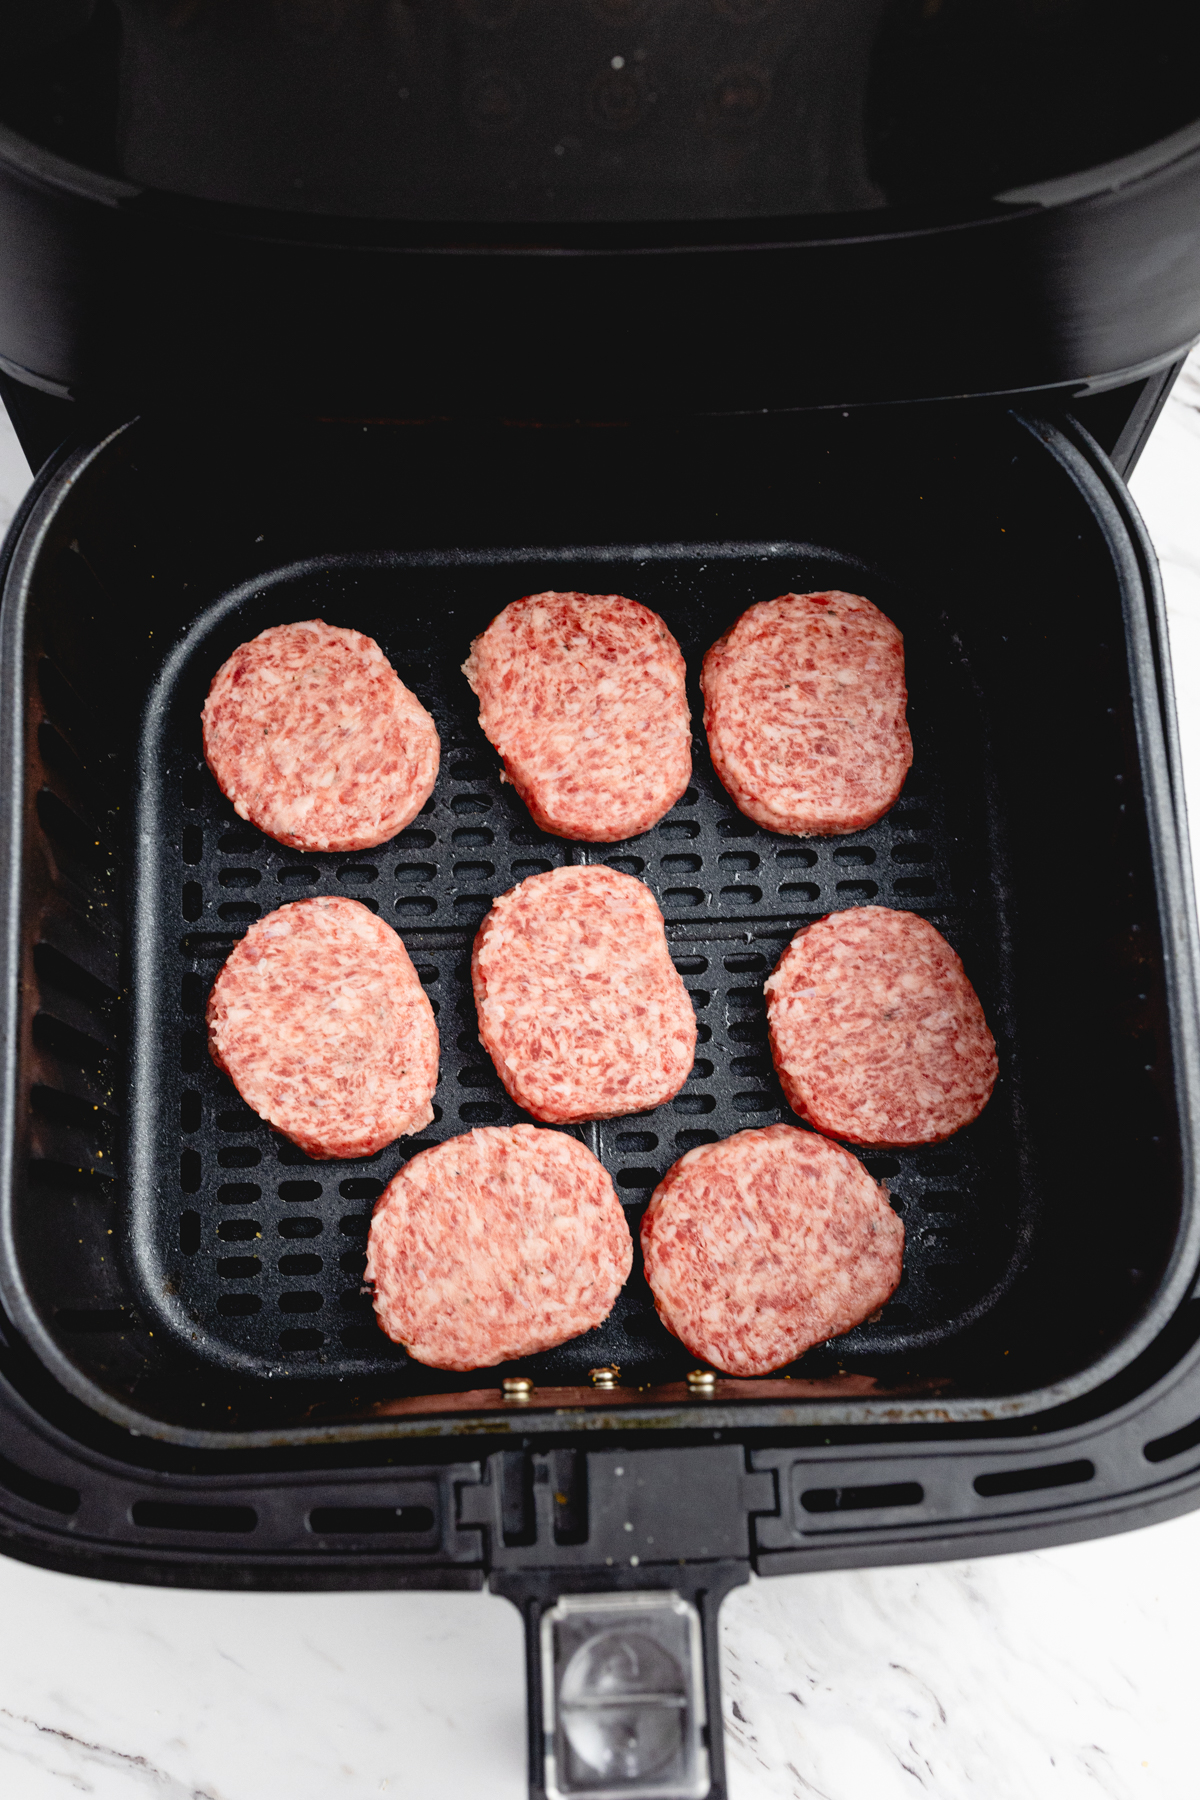 Top view of fresh sausage patties in the basket of an open air fryer.